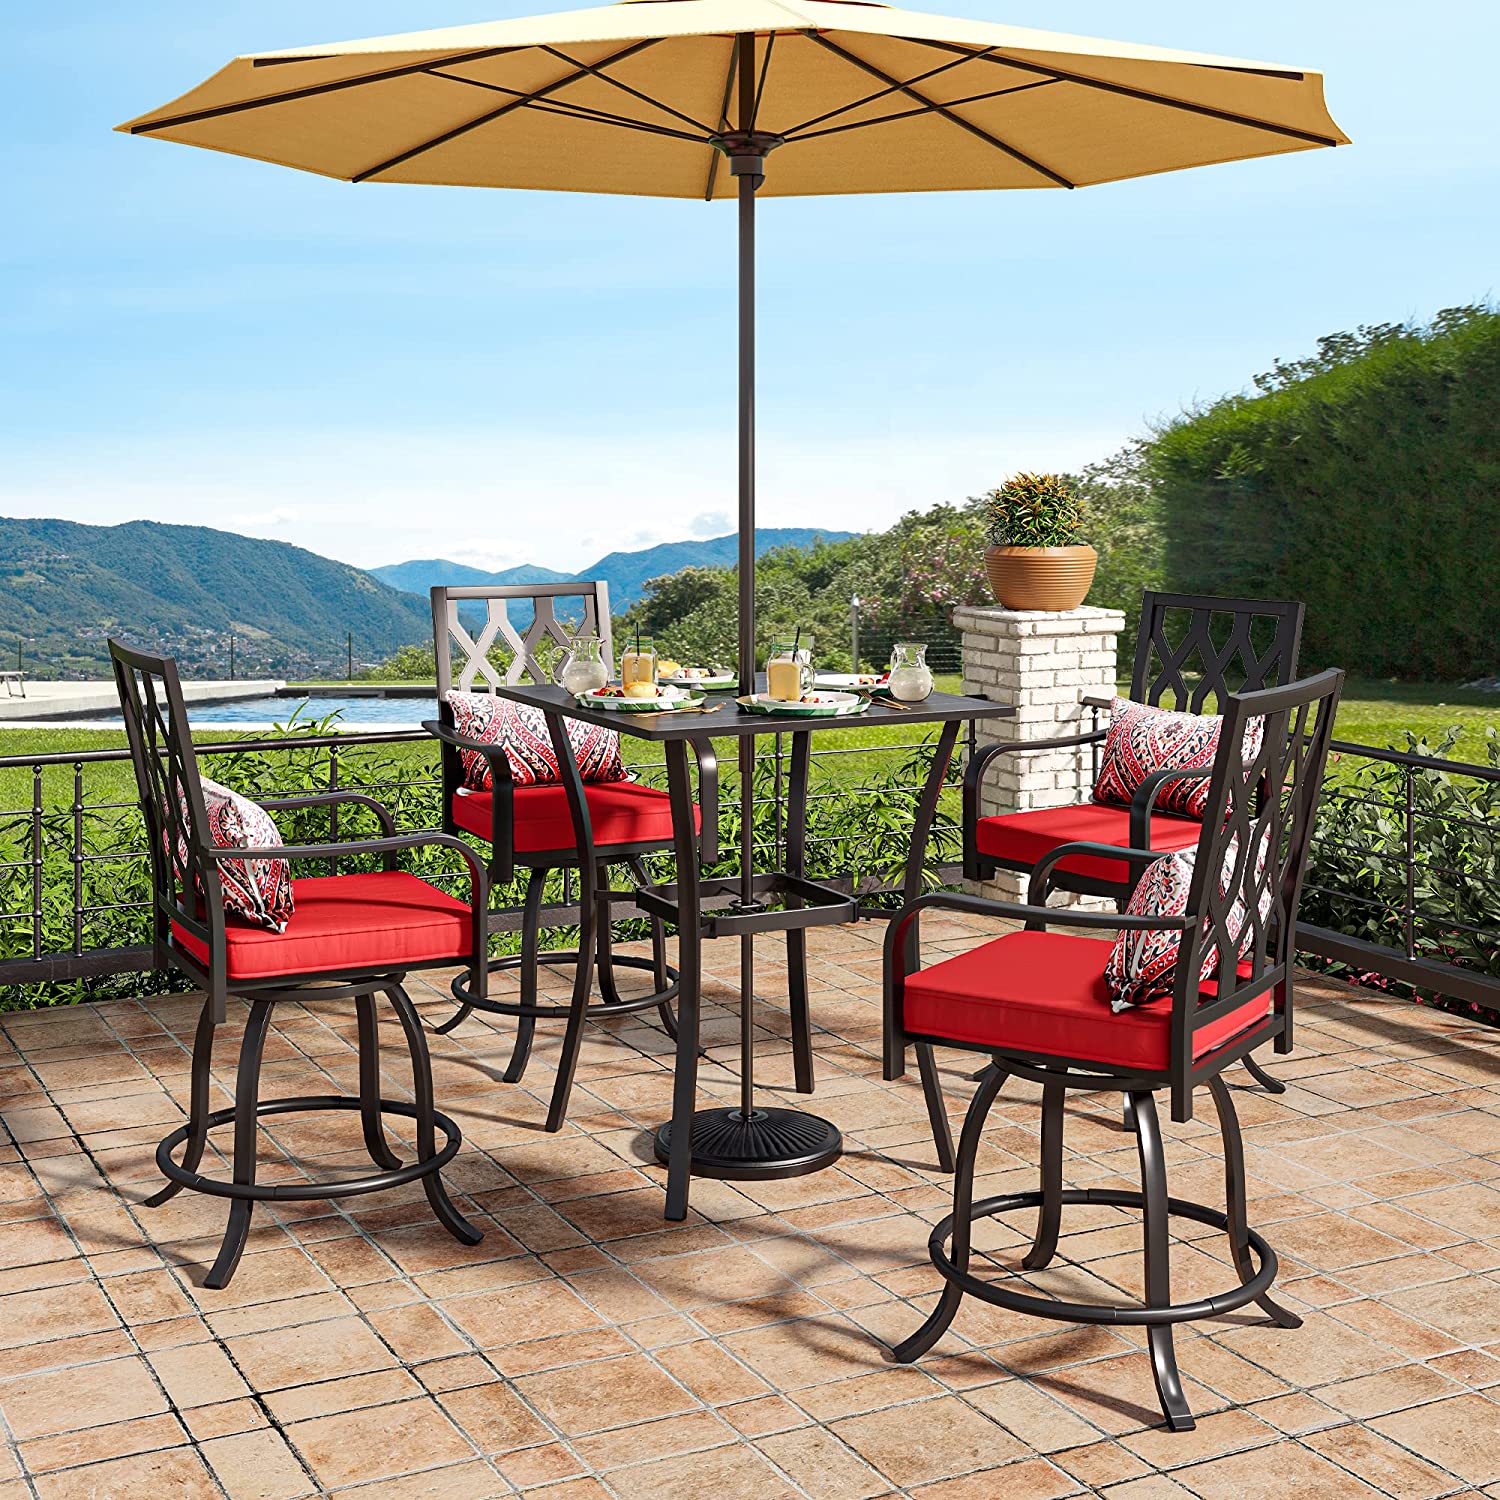 Dextrus 5-Piece Patio Swivel Bar Set, 32" Square Patio Bar Table (Umbrella Hole) and 4 Cushioned Swivel Bar Stools, Metal Patio Bar Set Ideal for Patio Lawn Garden Porch, Black - image 3 of 7